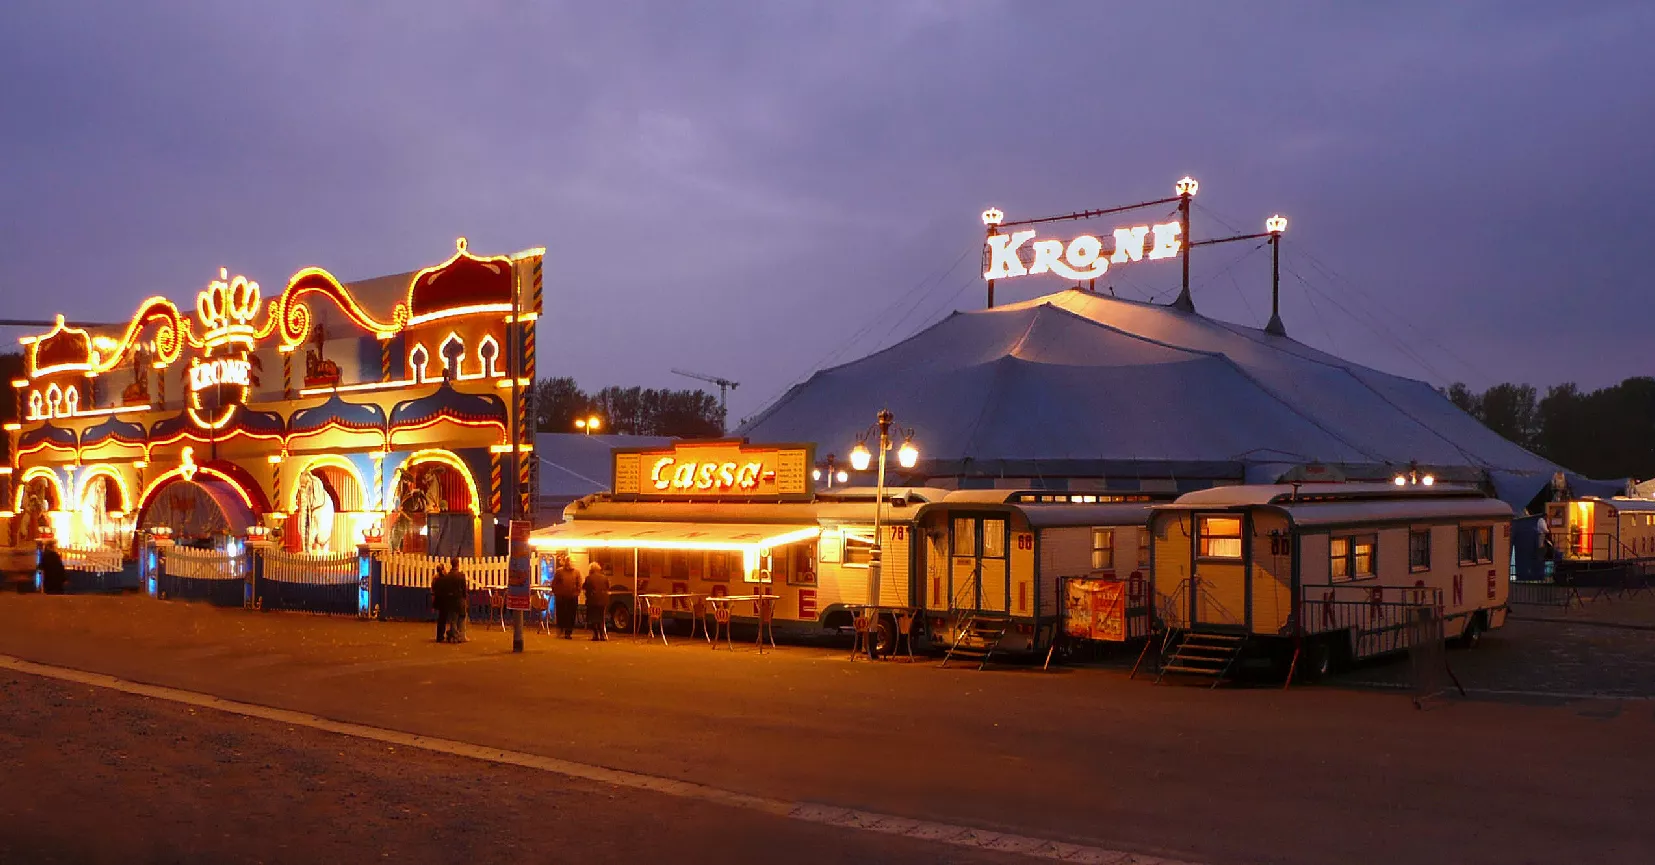 Circus Krone Building in Germany, Europe | Shows - Rated 4.1